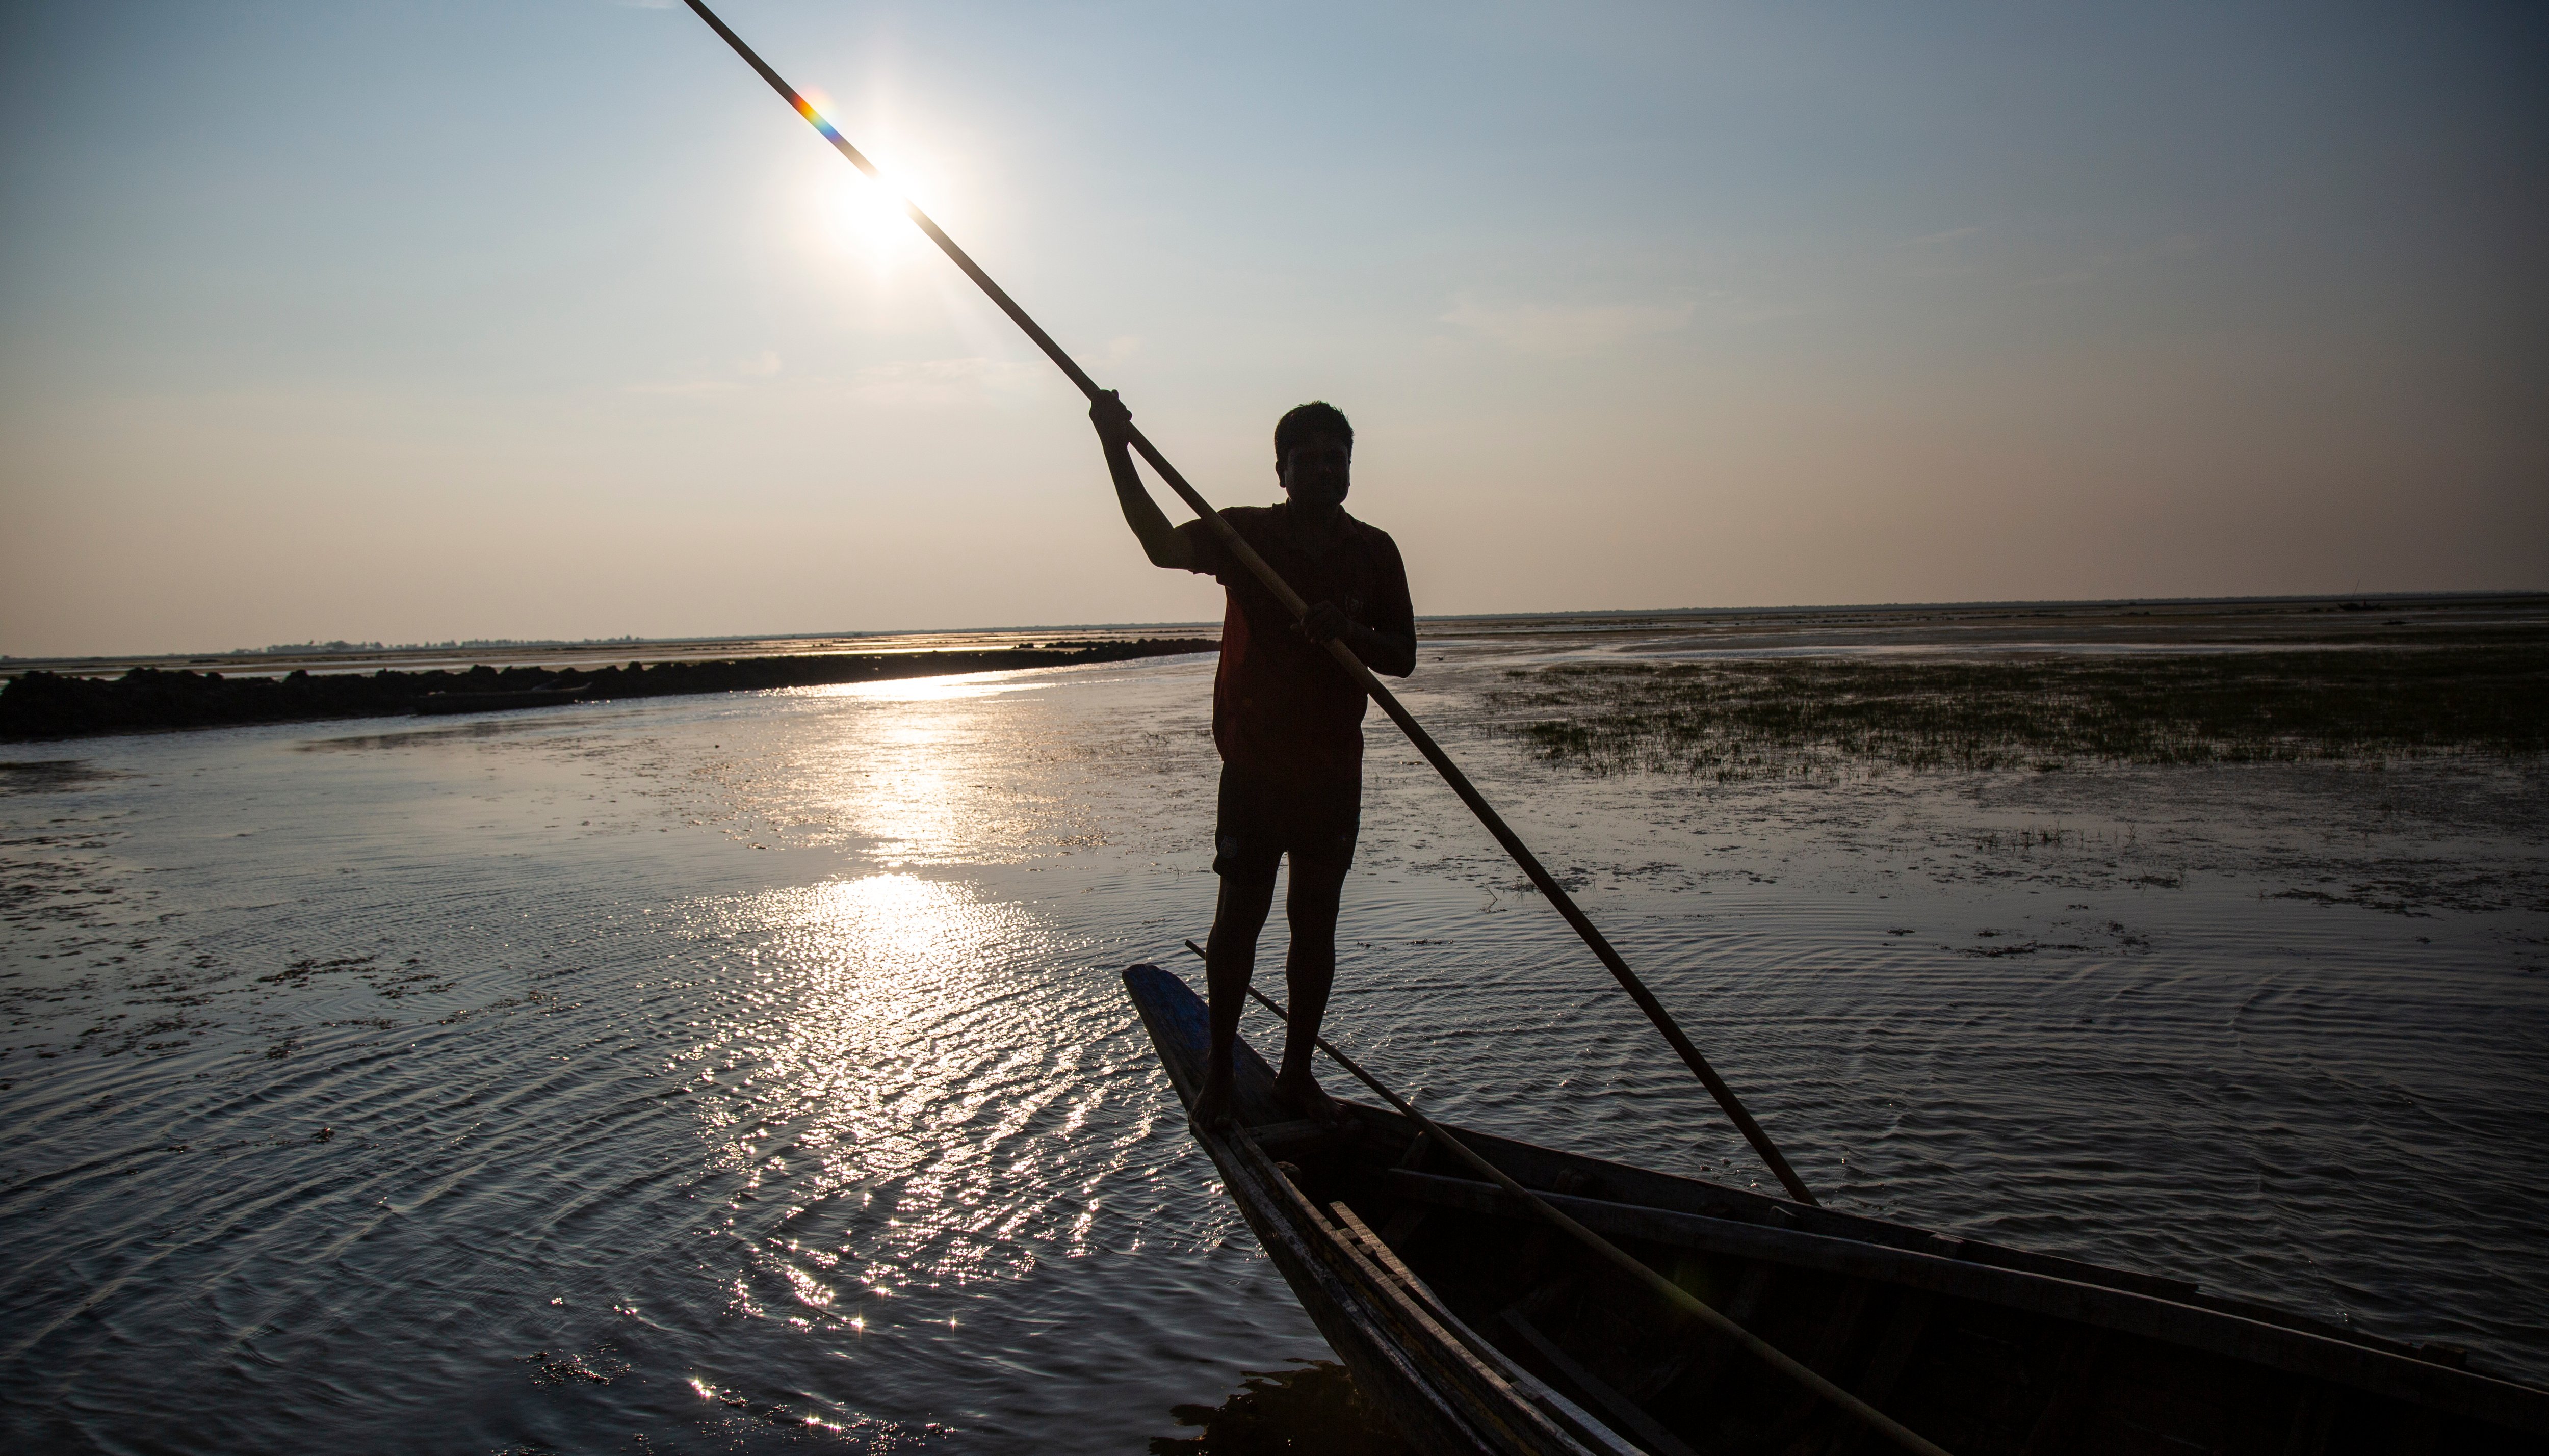 Read Bangladeshi fishers and farmers speak out against big coal and gas by Matt Tomkins